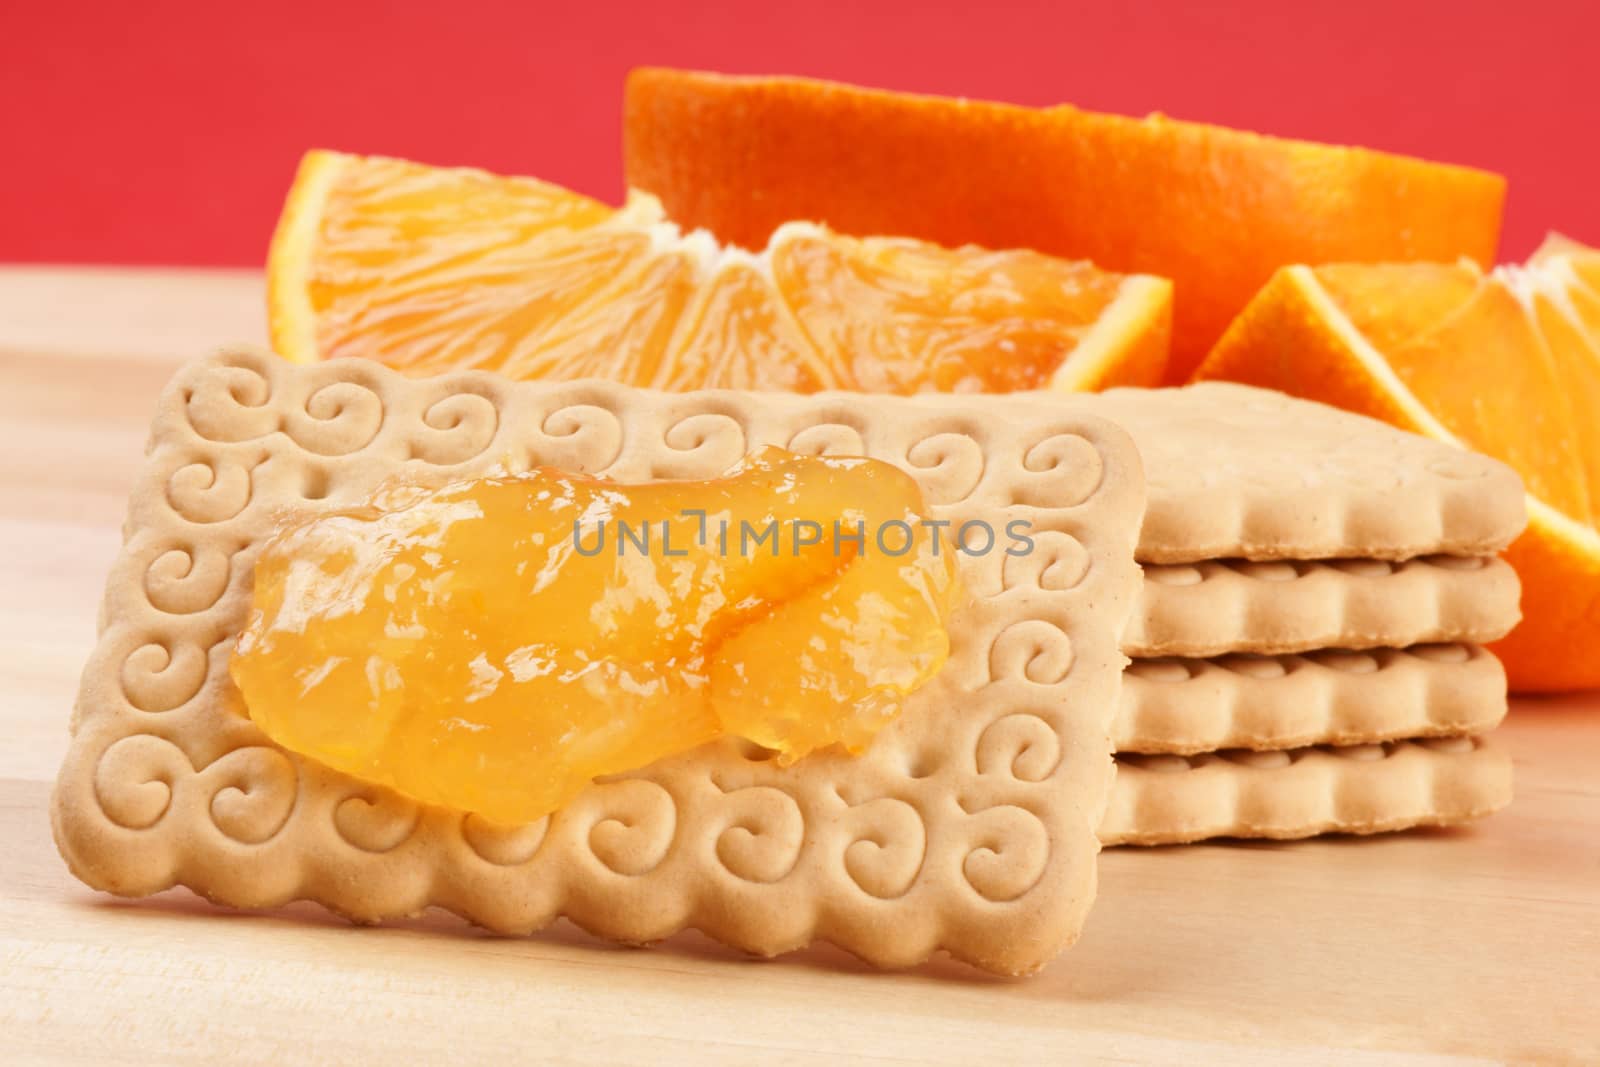 Biscuits, marmalade and slices of orange on a wooden cutting board